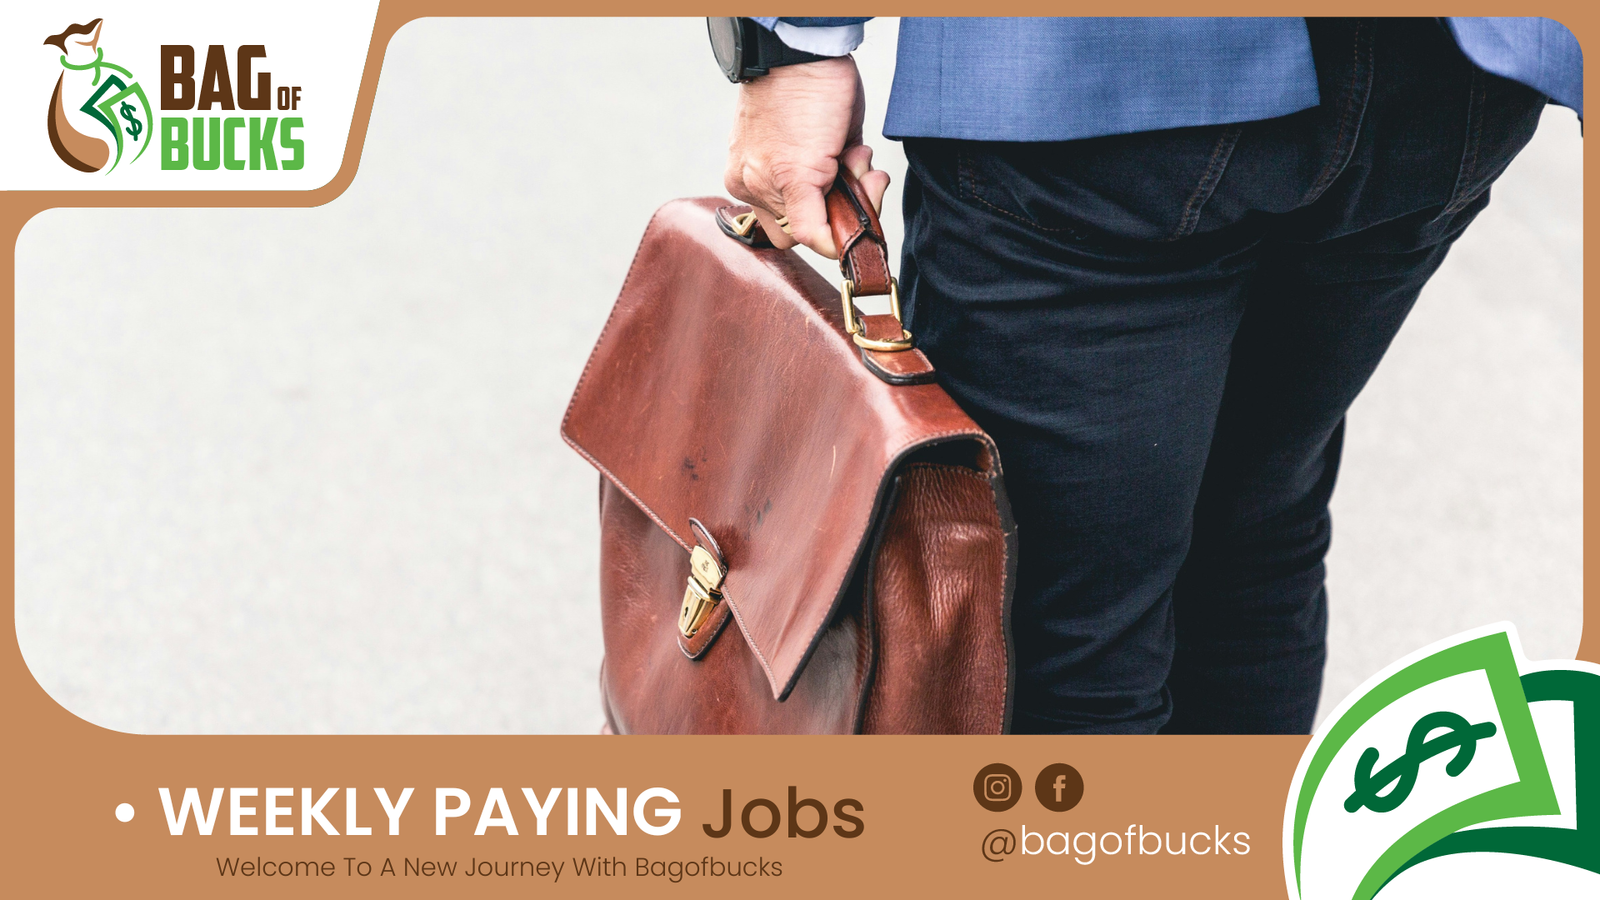 Jobs that pay weekly